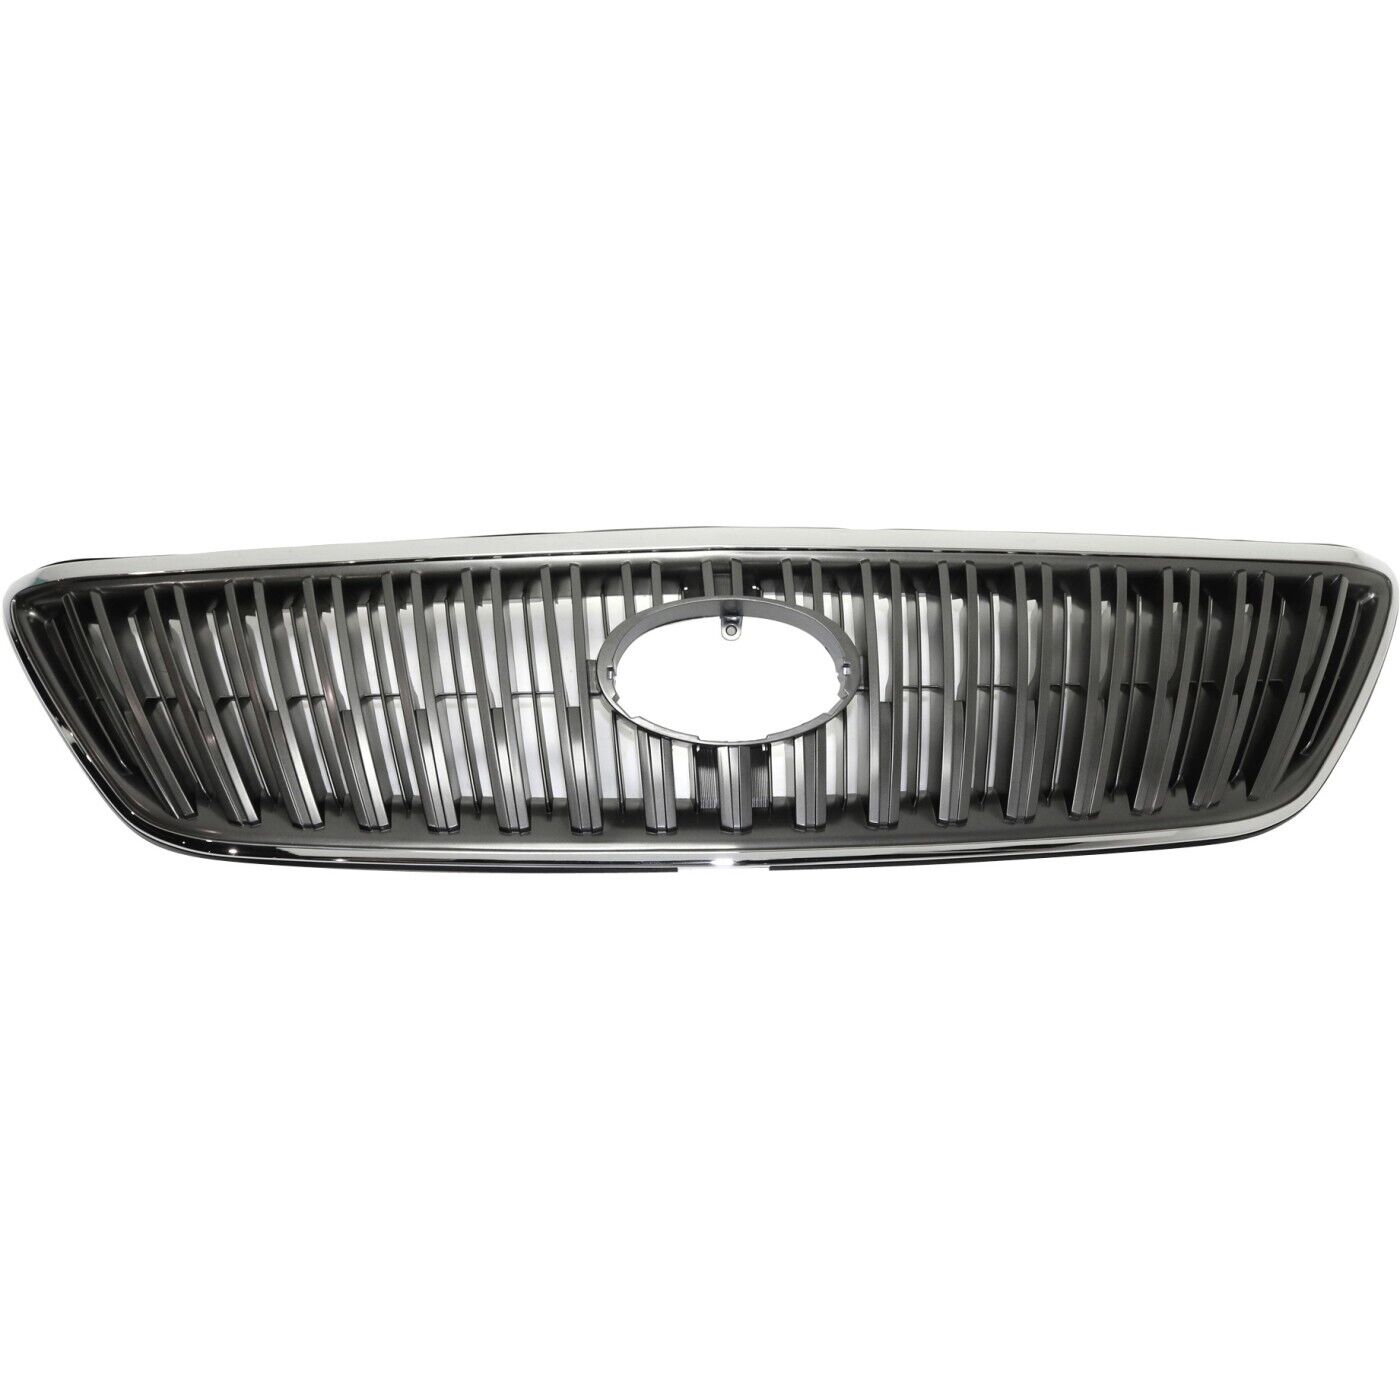 Grille For 2004-2006 Lexus RX330 2007-2009 RX350 Chrome Shell w/ Gray Insert